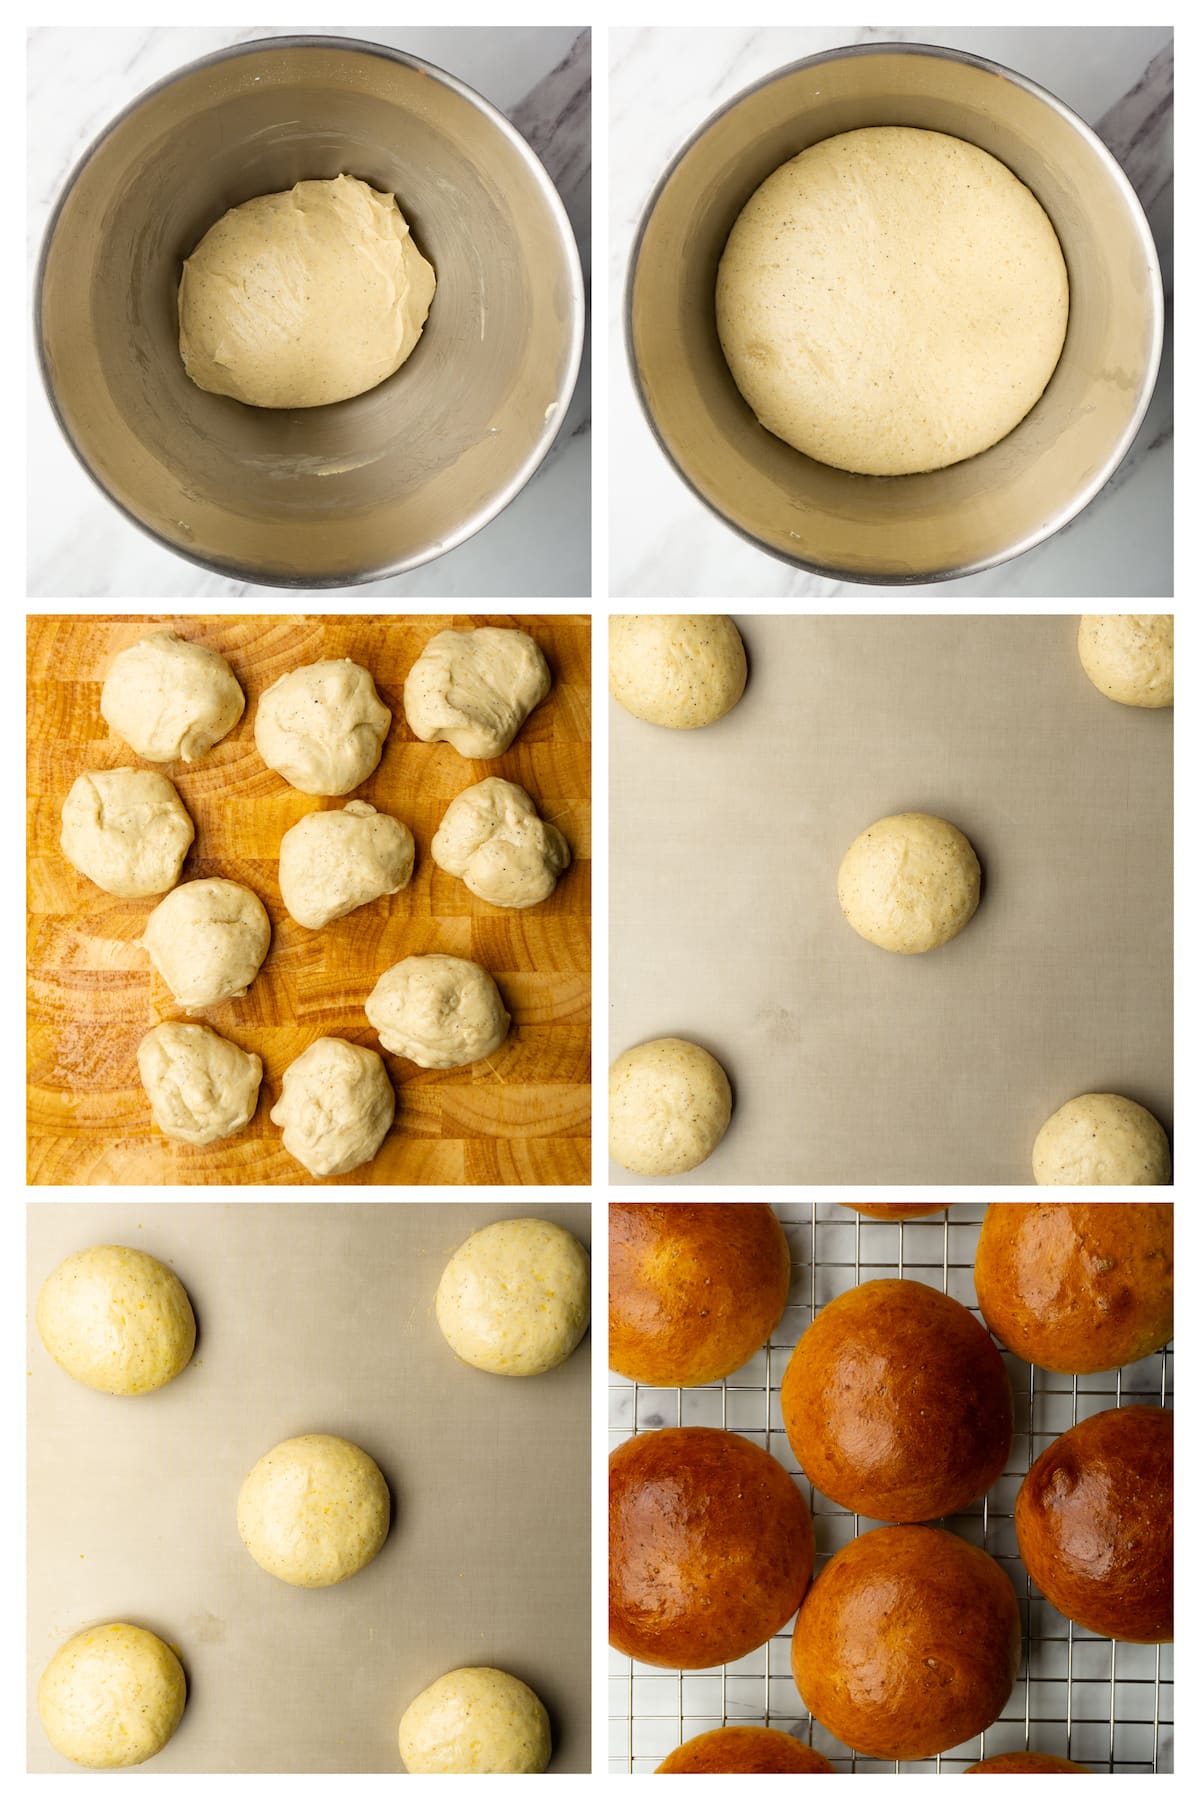 The collage image shows six steps to shape and bake cardamom buns for Swedish semlor.